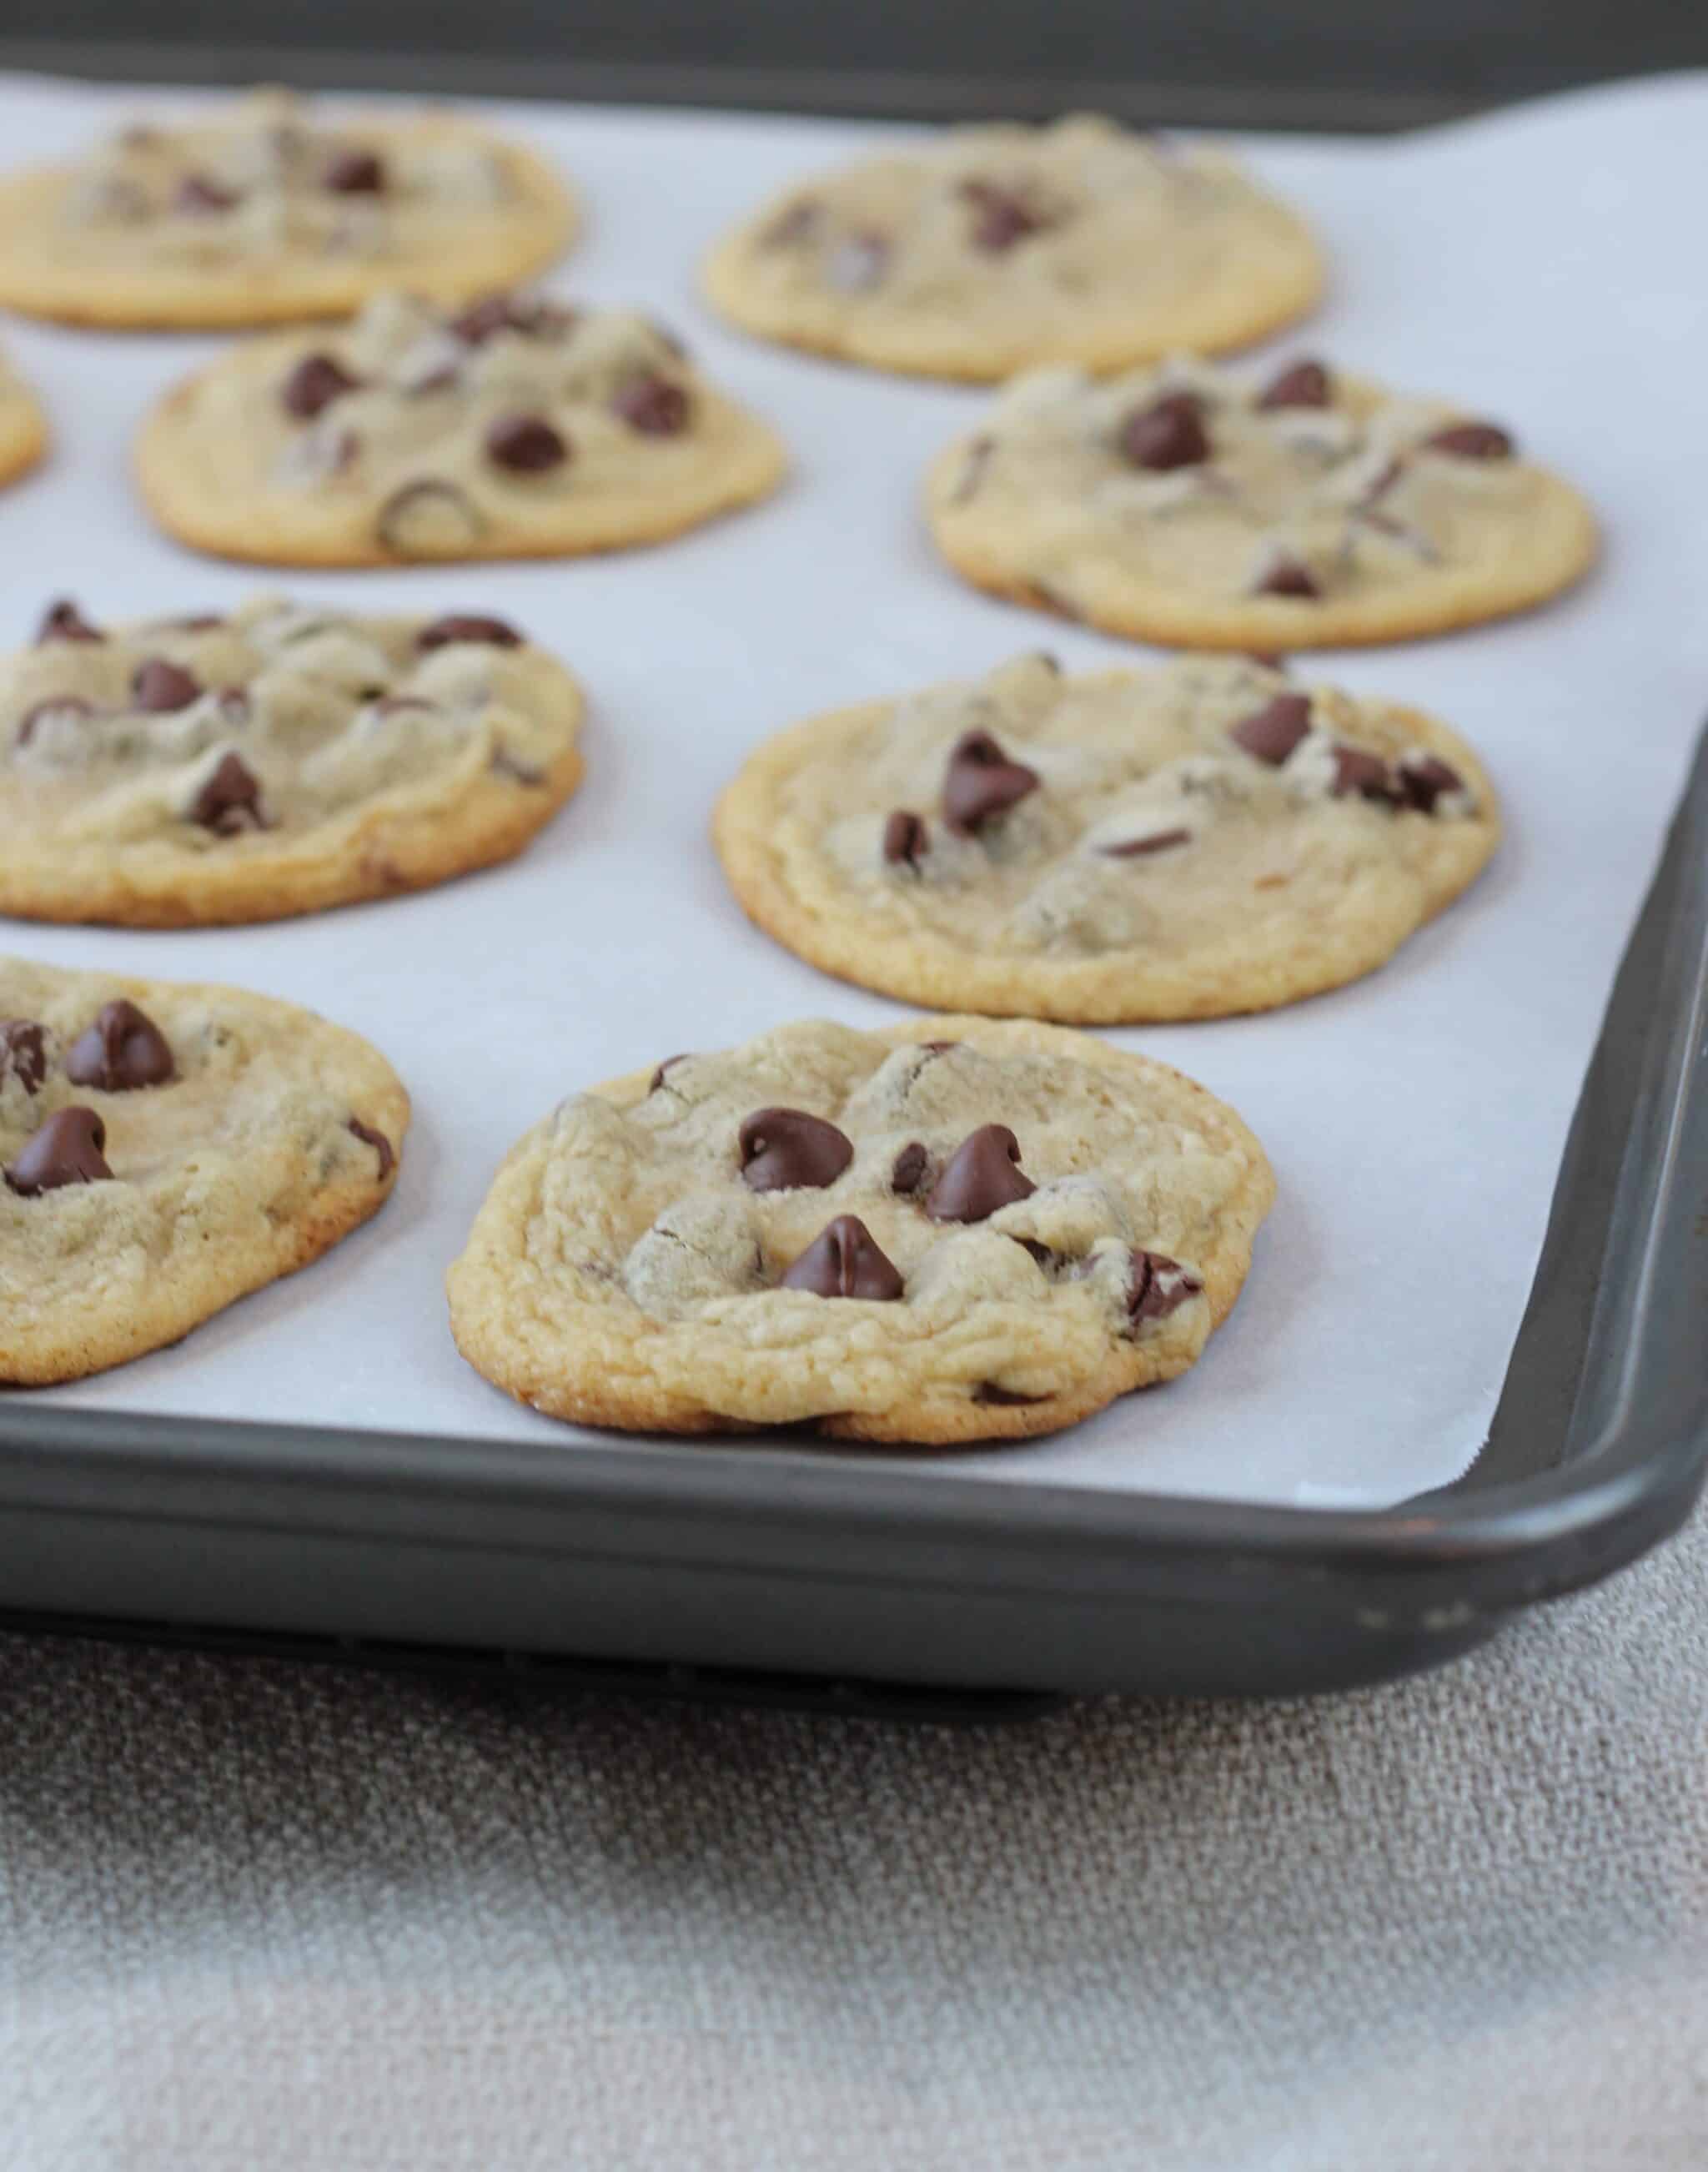 Chocolate Chip Cookies - The New York Times Top Rated Recipe!